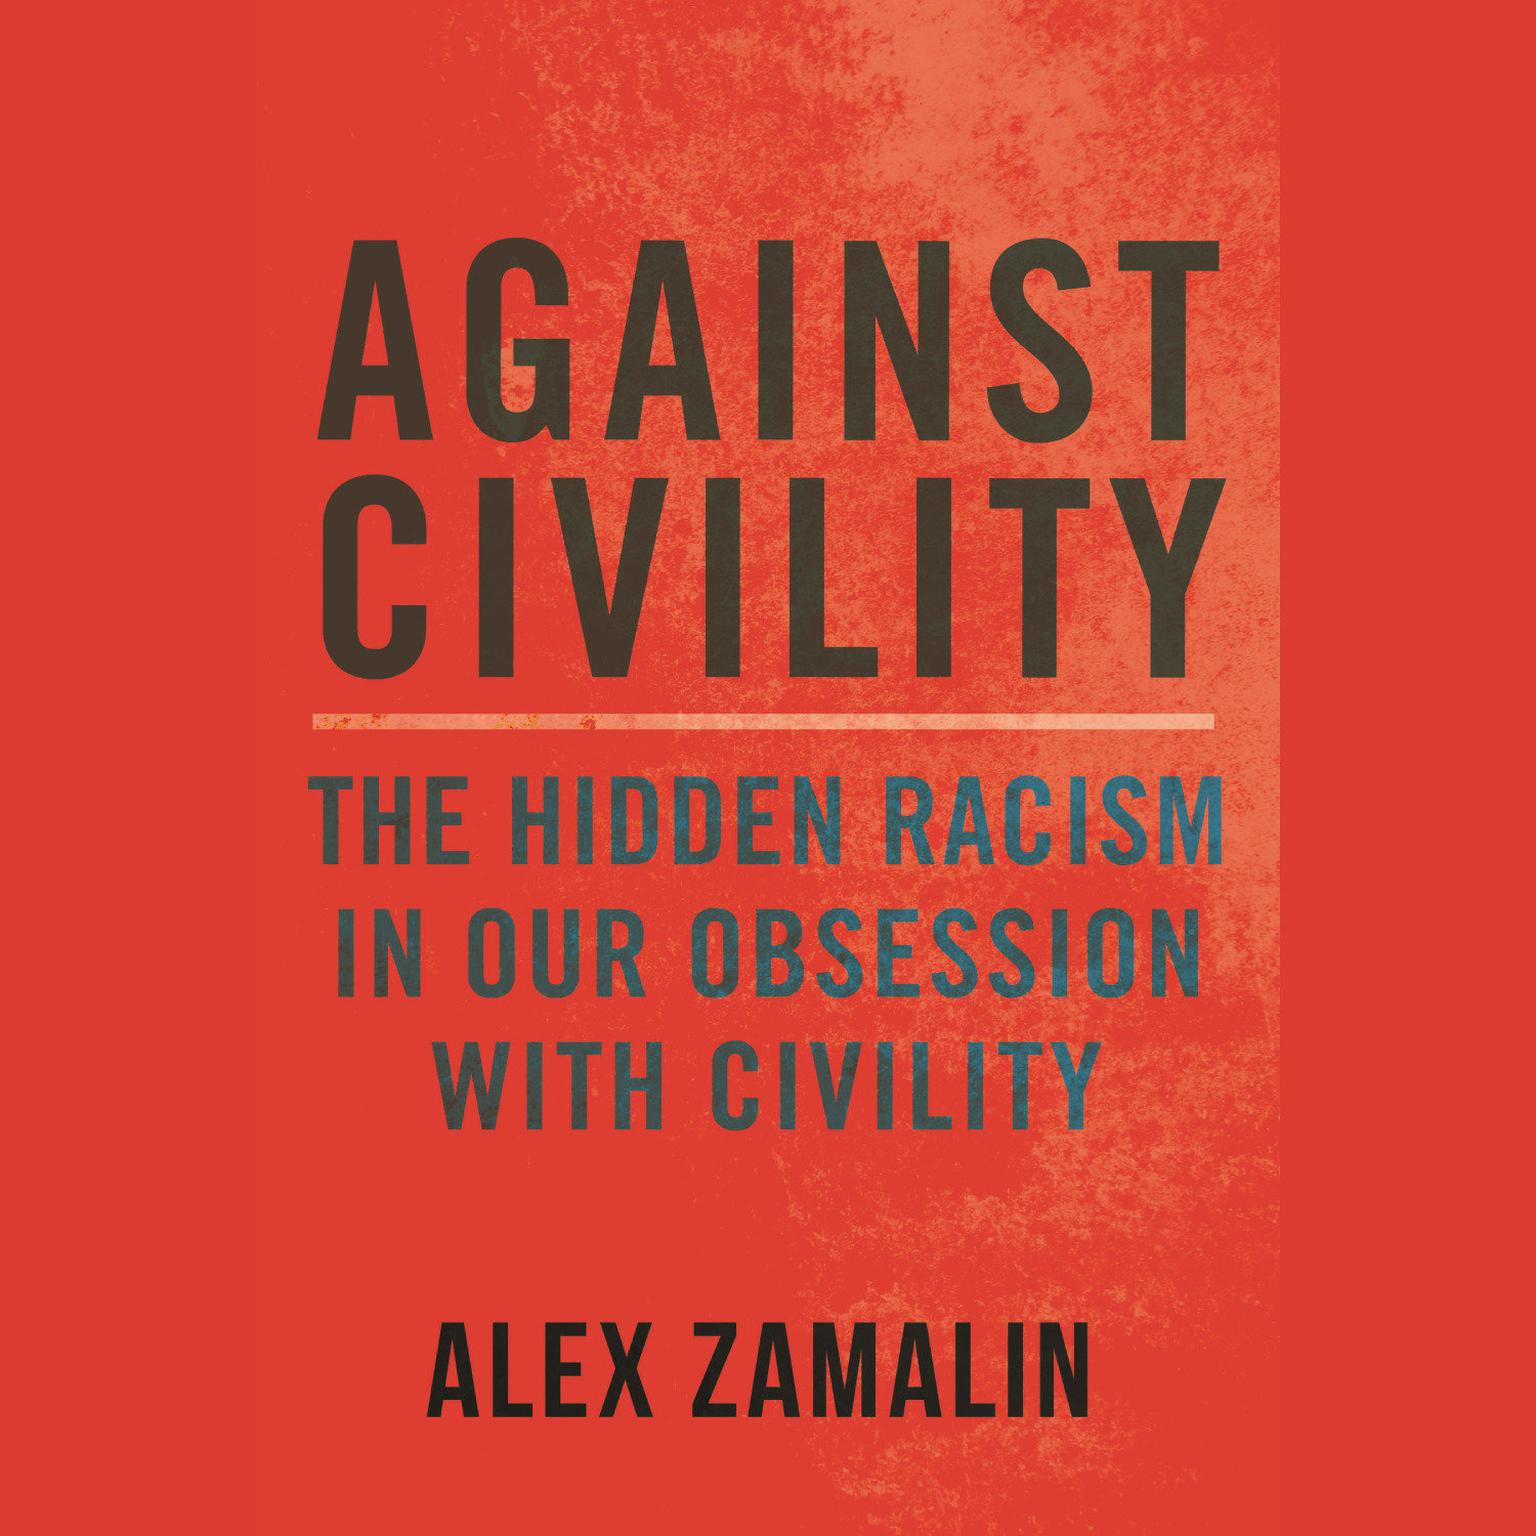 Against Civility: The Hidden Racism in Our Obsession with Civility Audiobook, by Alex Zamalin